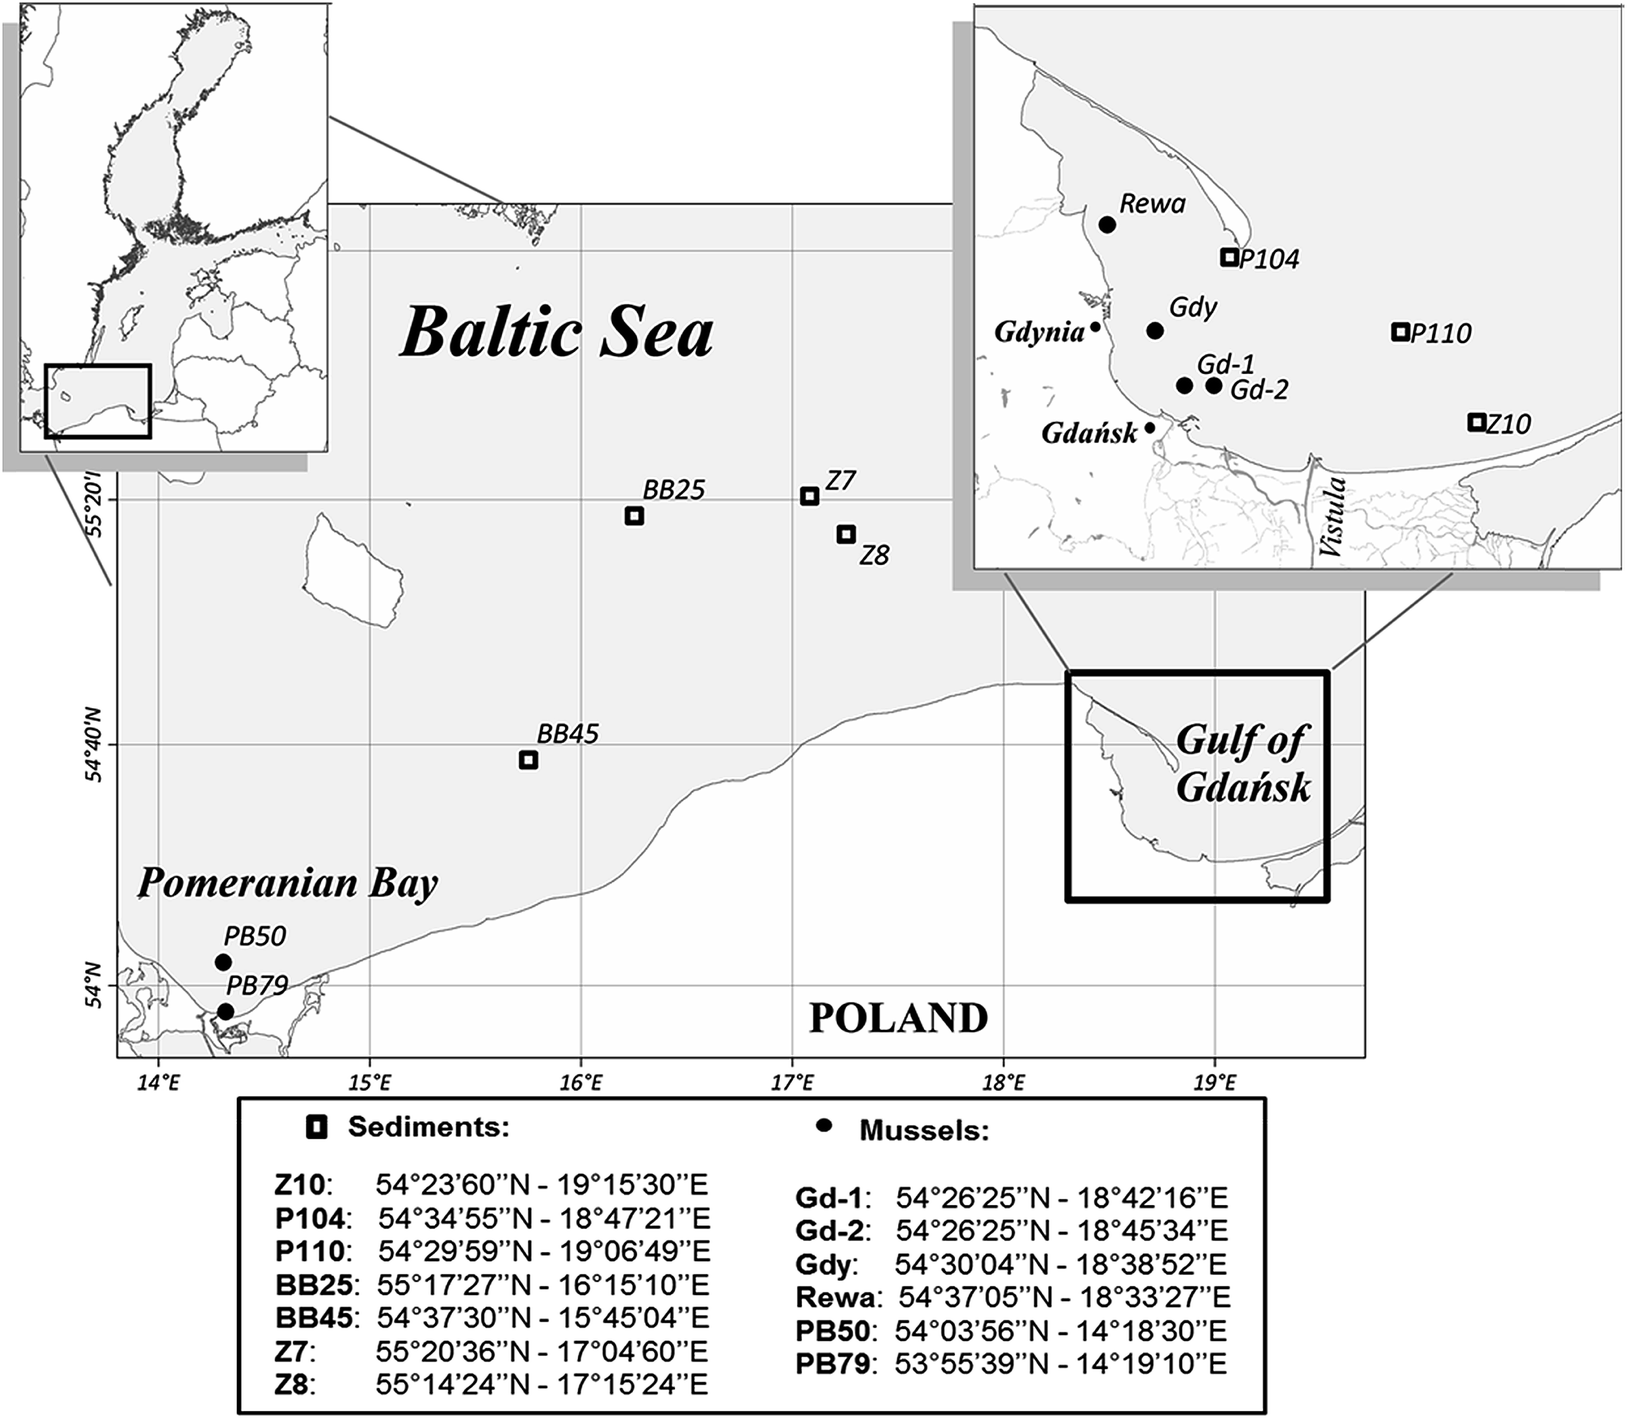 Assessment Of Native And Alkylated Polycyclic Aromatic Hydrocarbons Pahs In Sediments And Mussels Mytilus Spp In The Southern Baltic Sea Environmental Science Processes Impacts Rsc Publishing Doi 10 1039 C8emj